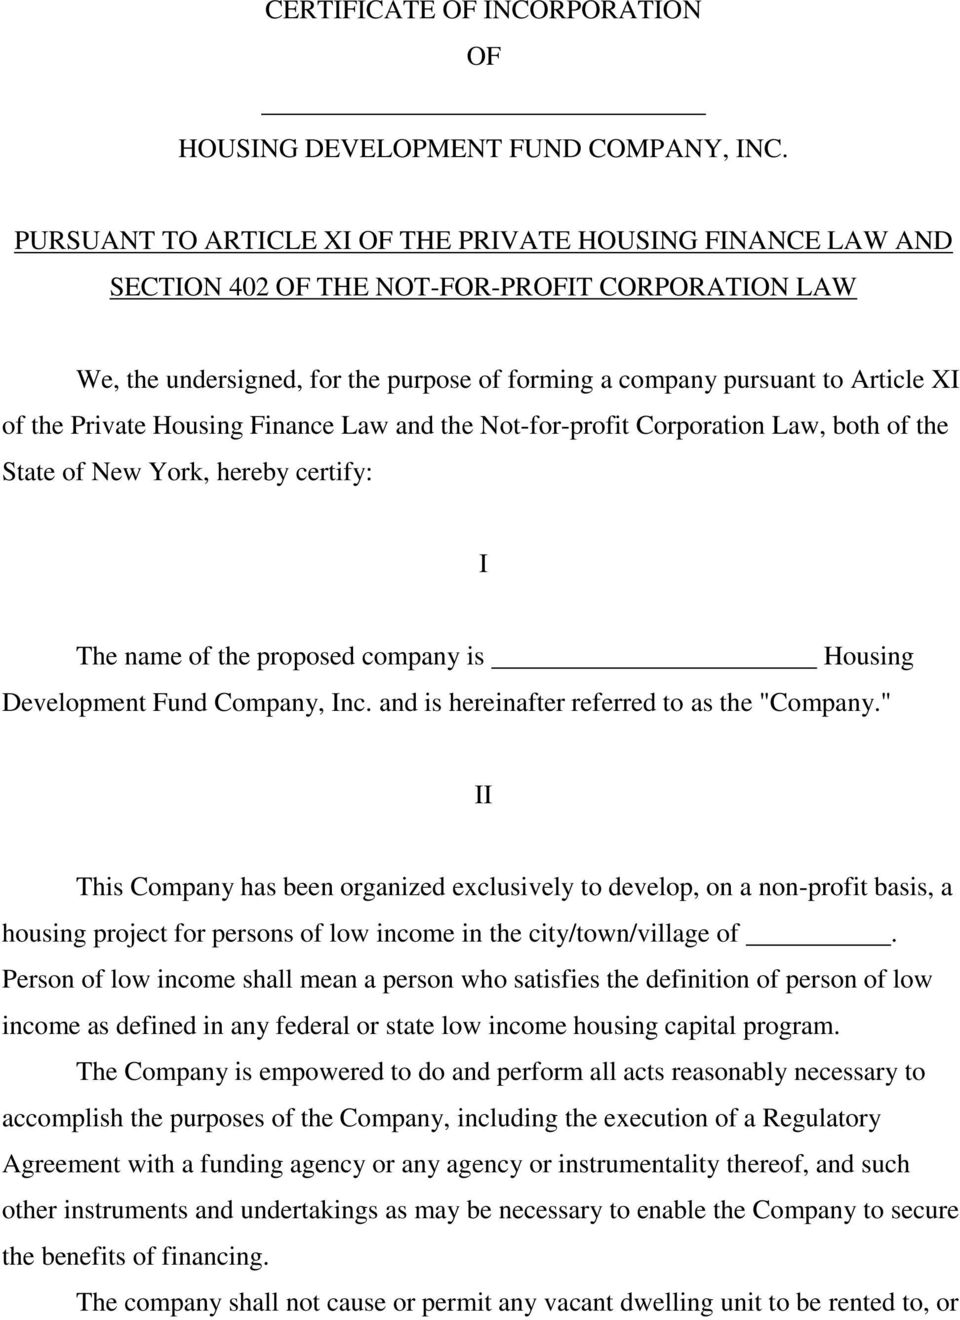 Private Housing Finance Law and the Not-for-profit Corporation Law, both of the State of New York, hereby certify: I The name of the proposed company is Housing Development Fund Company, Inc.